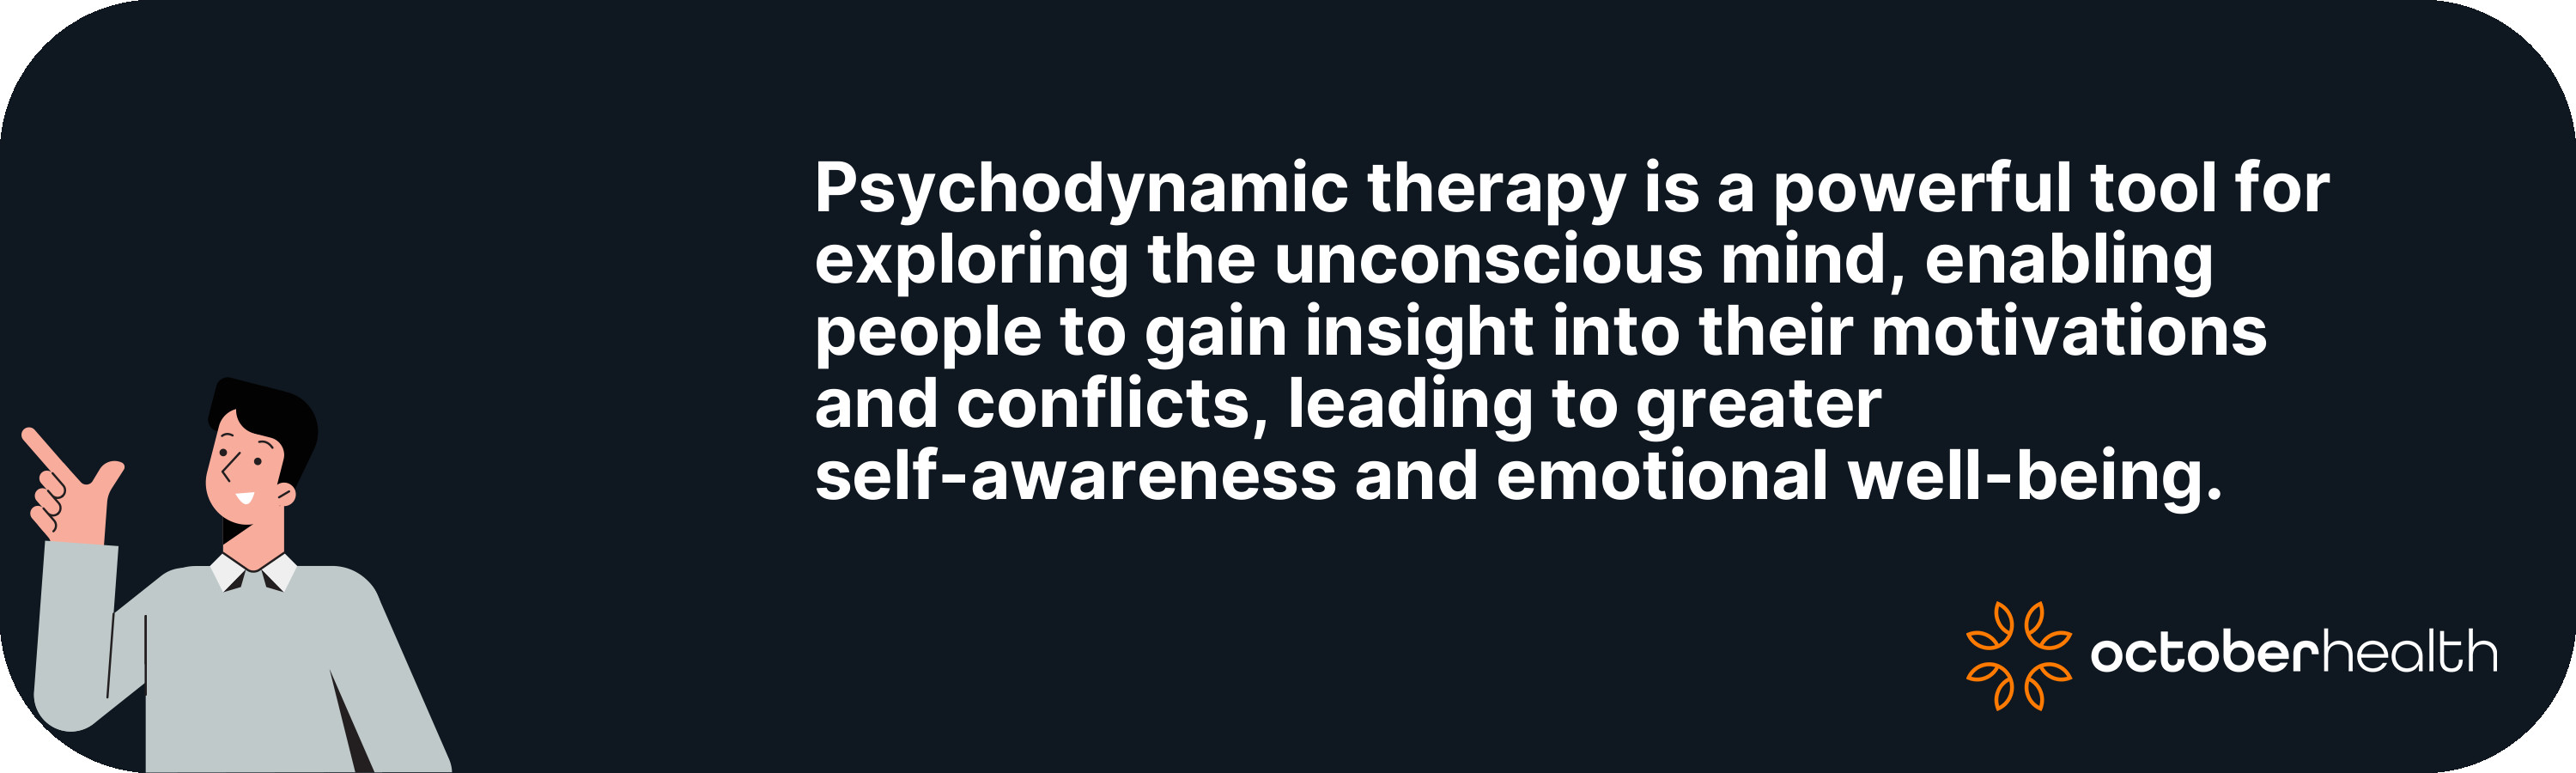 Psychodynamic therapy is a powerful tool...